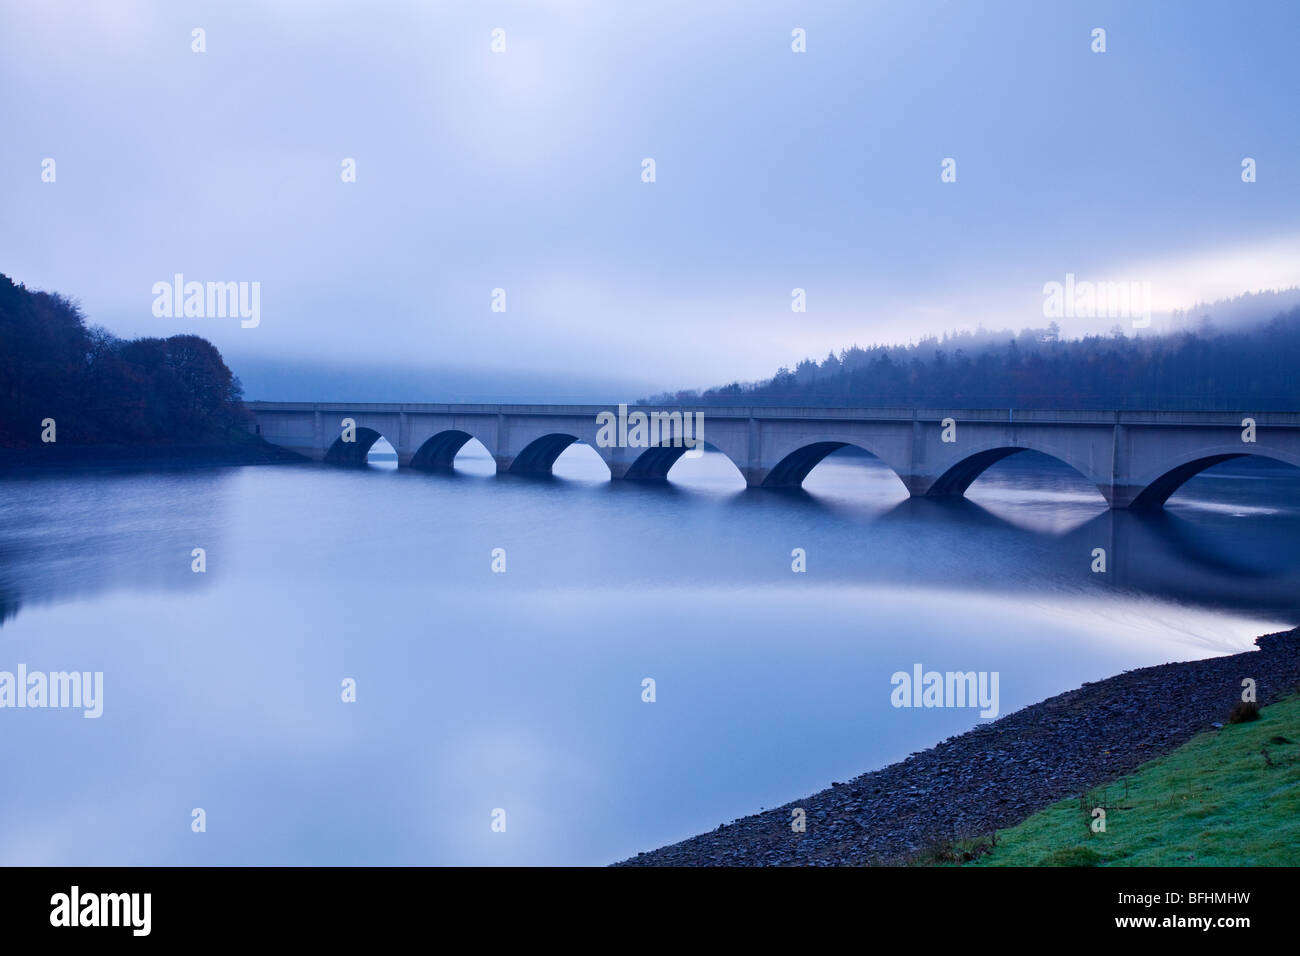 Ashopton Viaduct on the A57 Snake Pass road on a cold misty dawn dawn in the Peak District, Derbyshire. Stock Photo